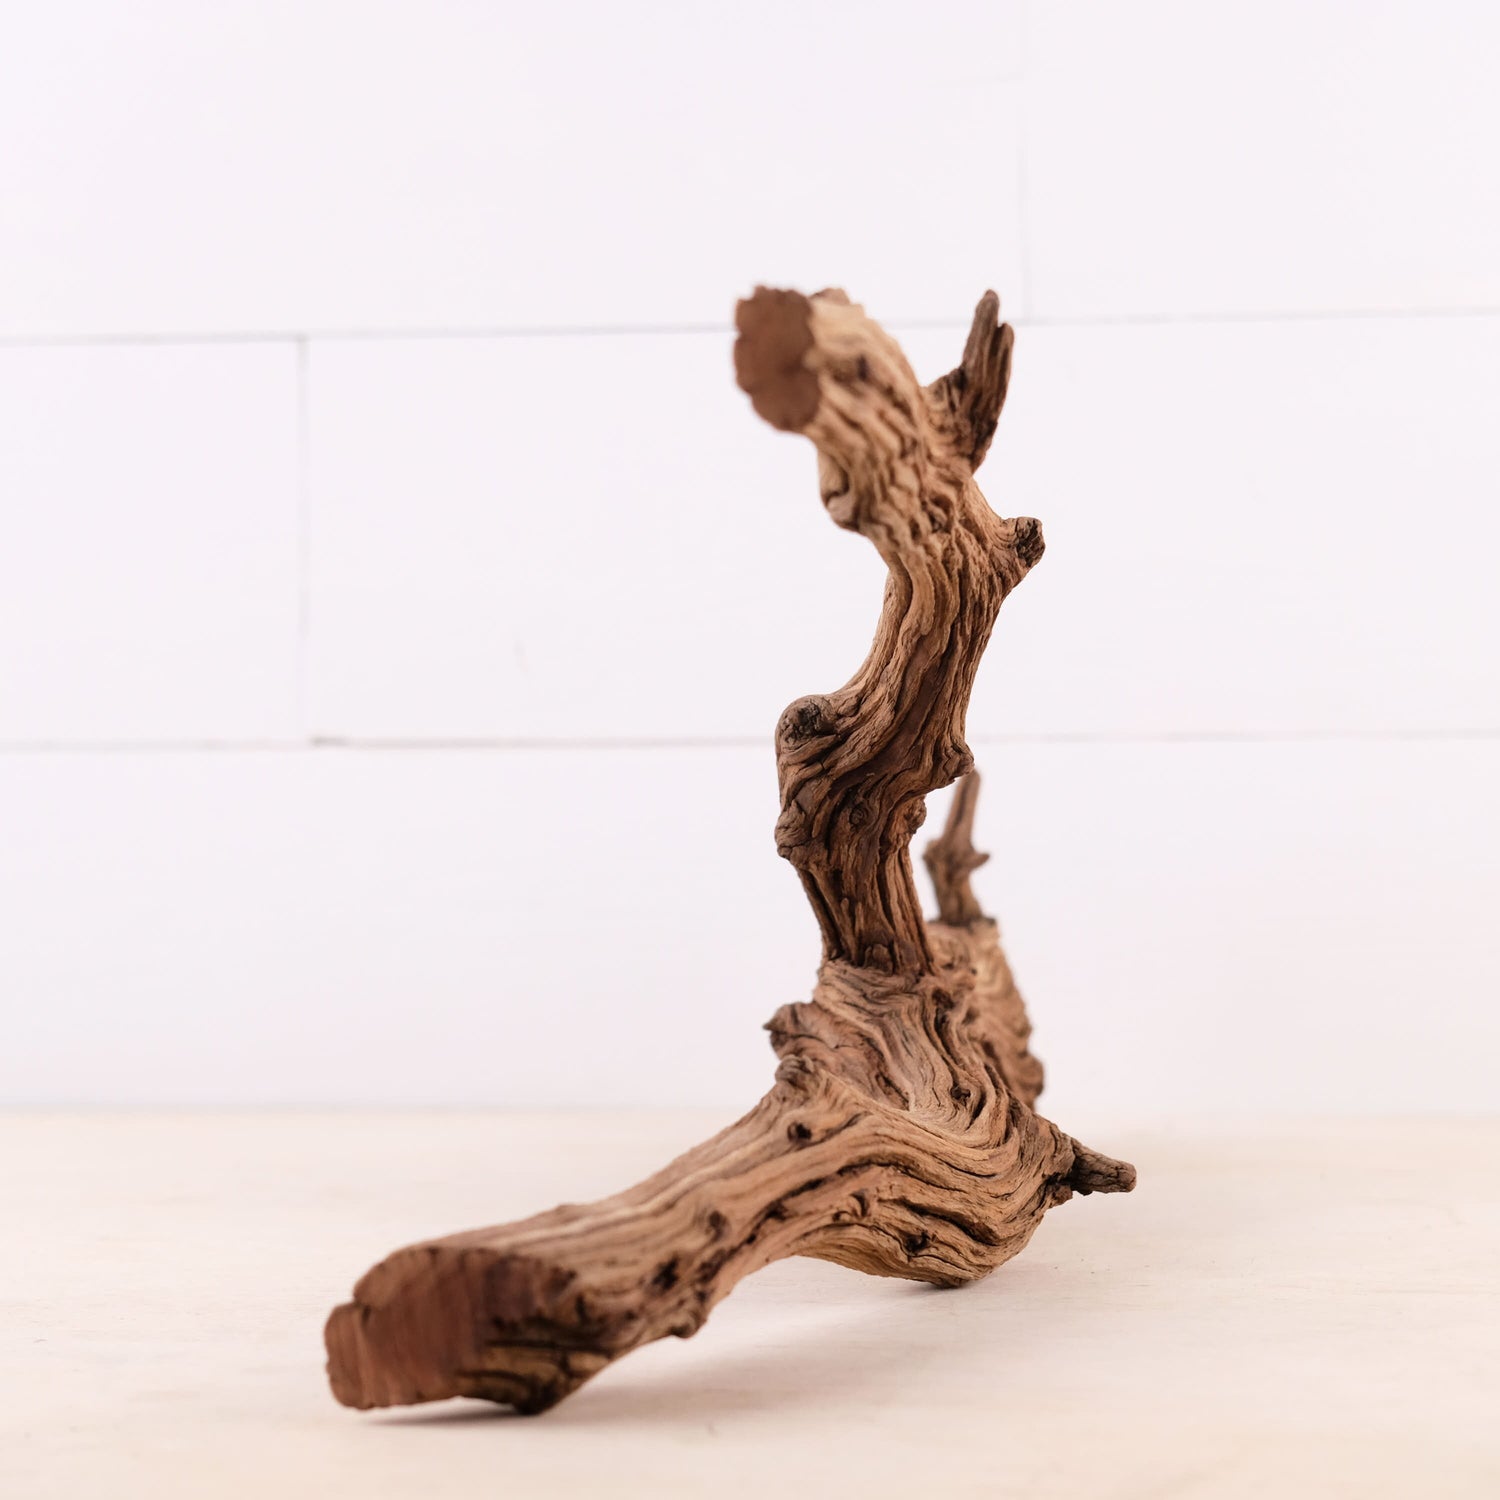 Driftwood Branch Decor  Shop Now For Free Shipping